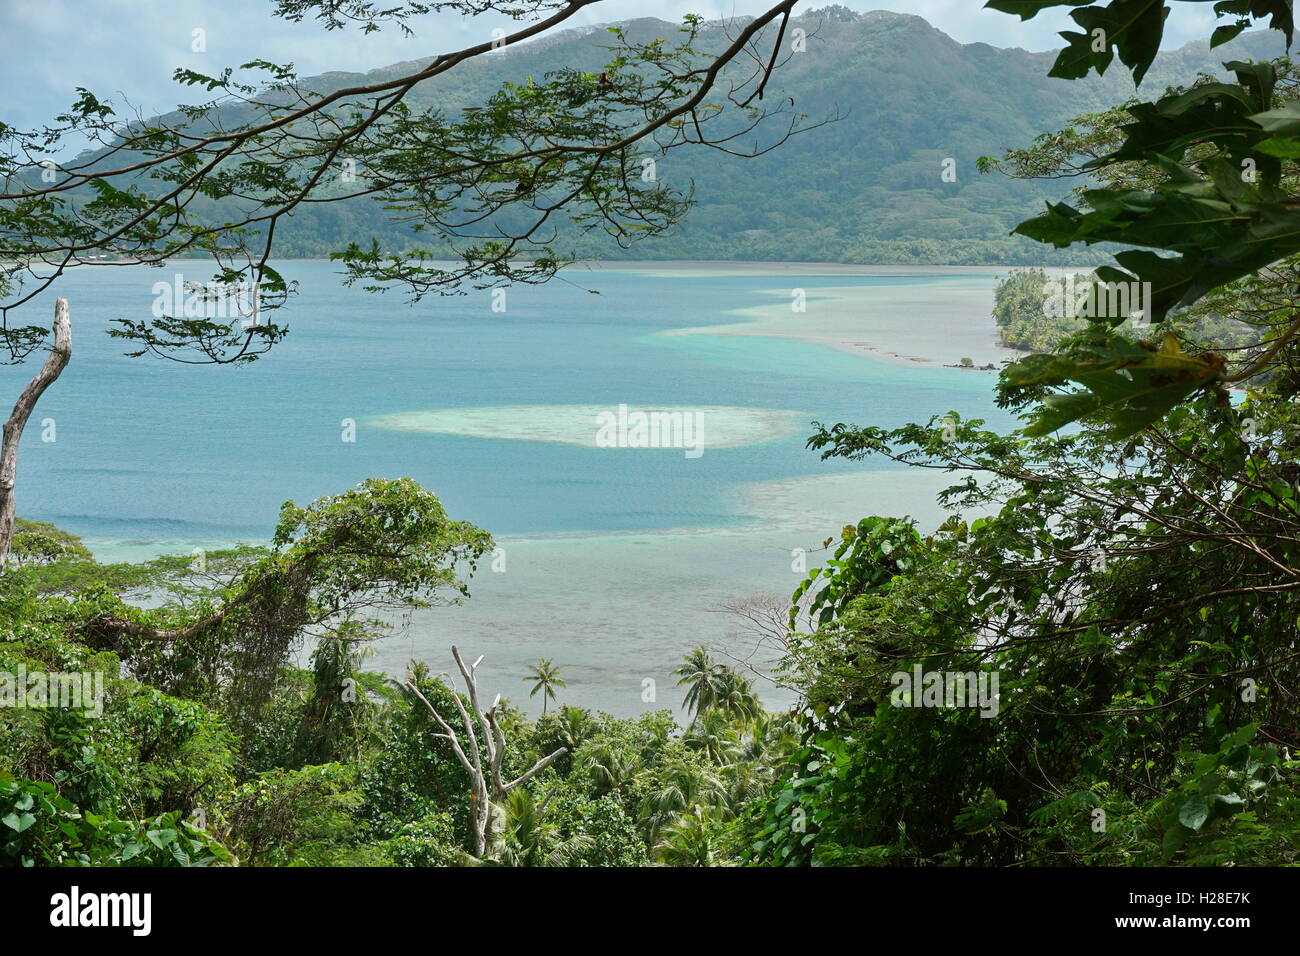 Green vegetation with ocean view, Bourayne bay, Huahine island, south Pacific ocean, French Polynesia Stock Photo